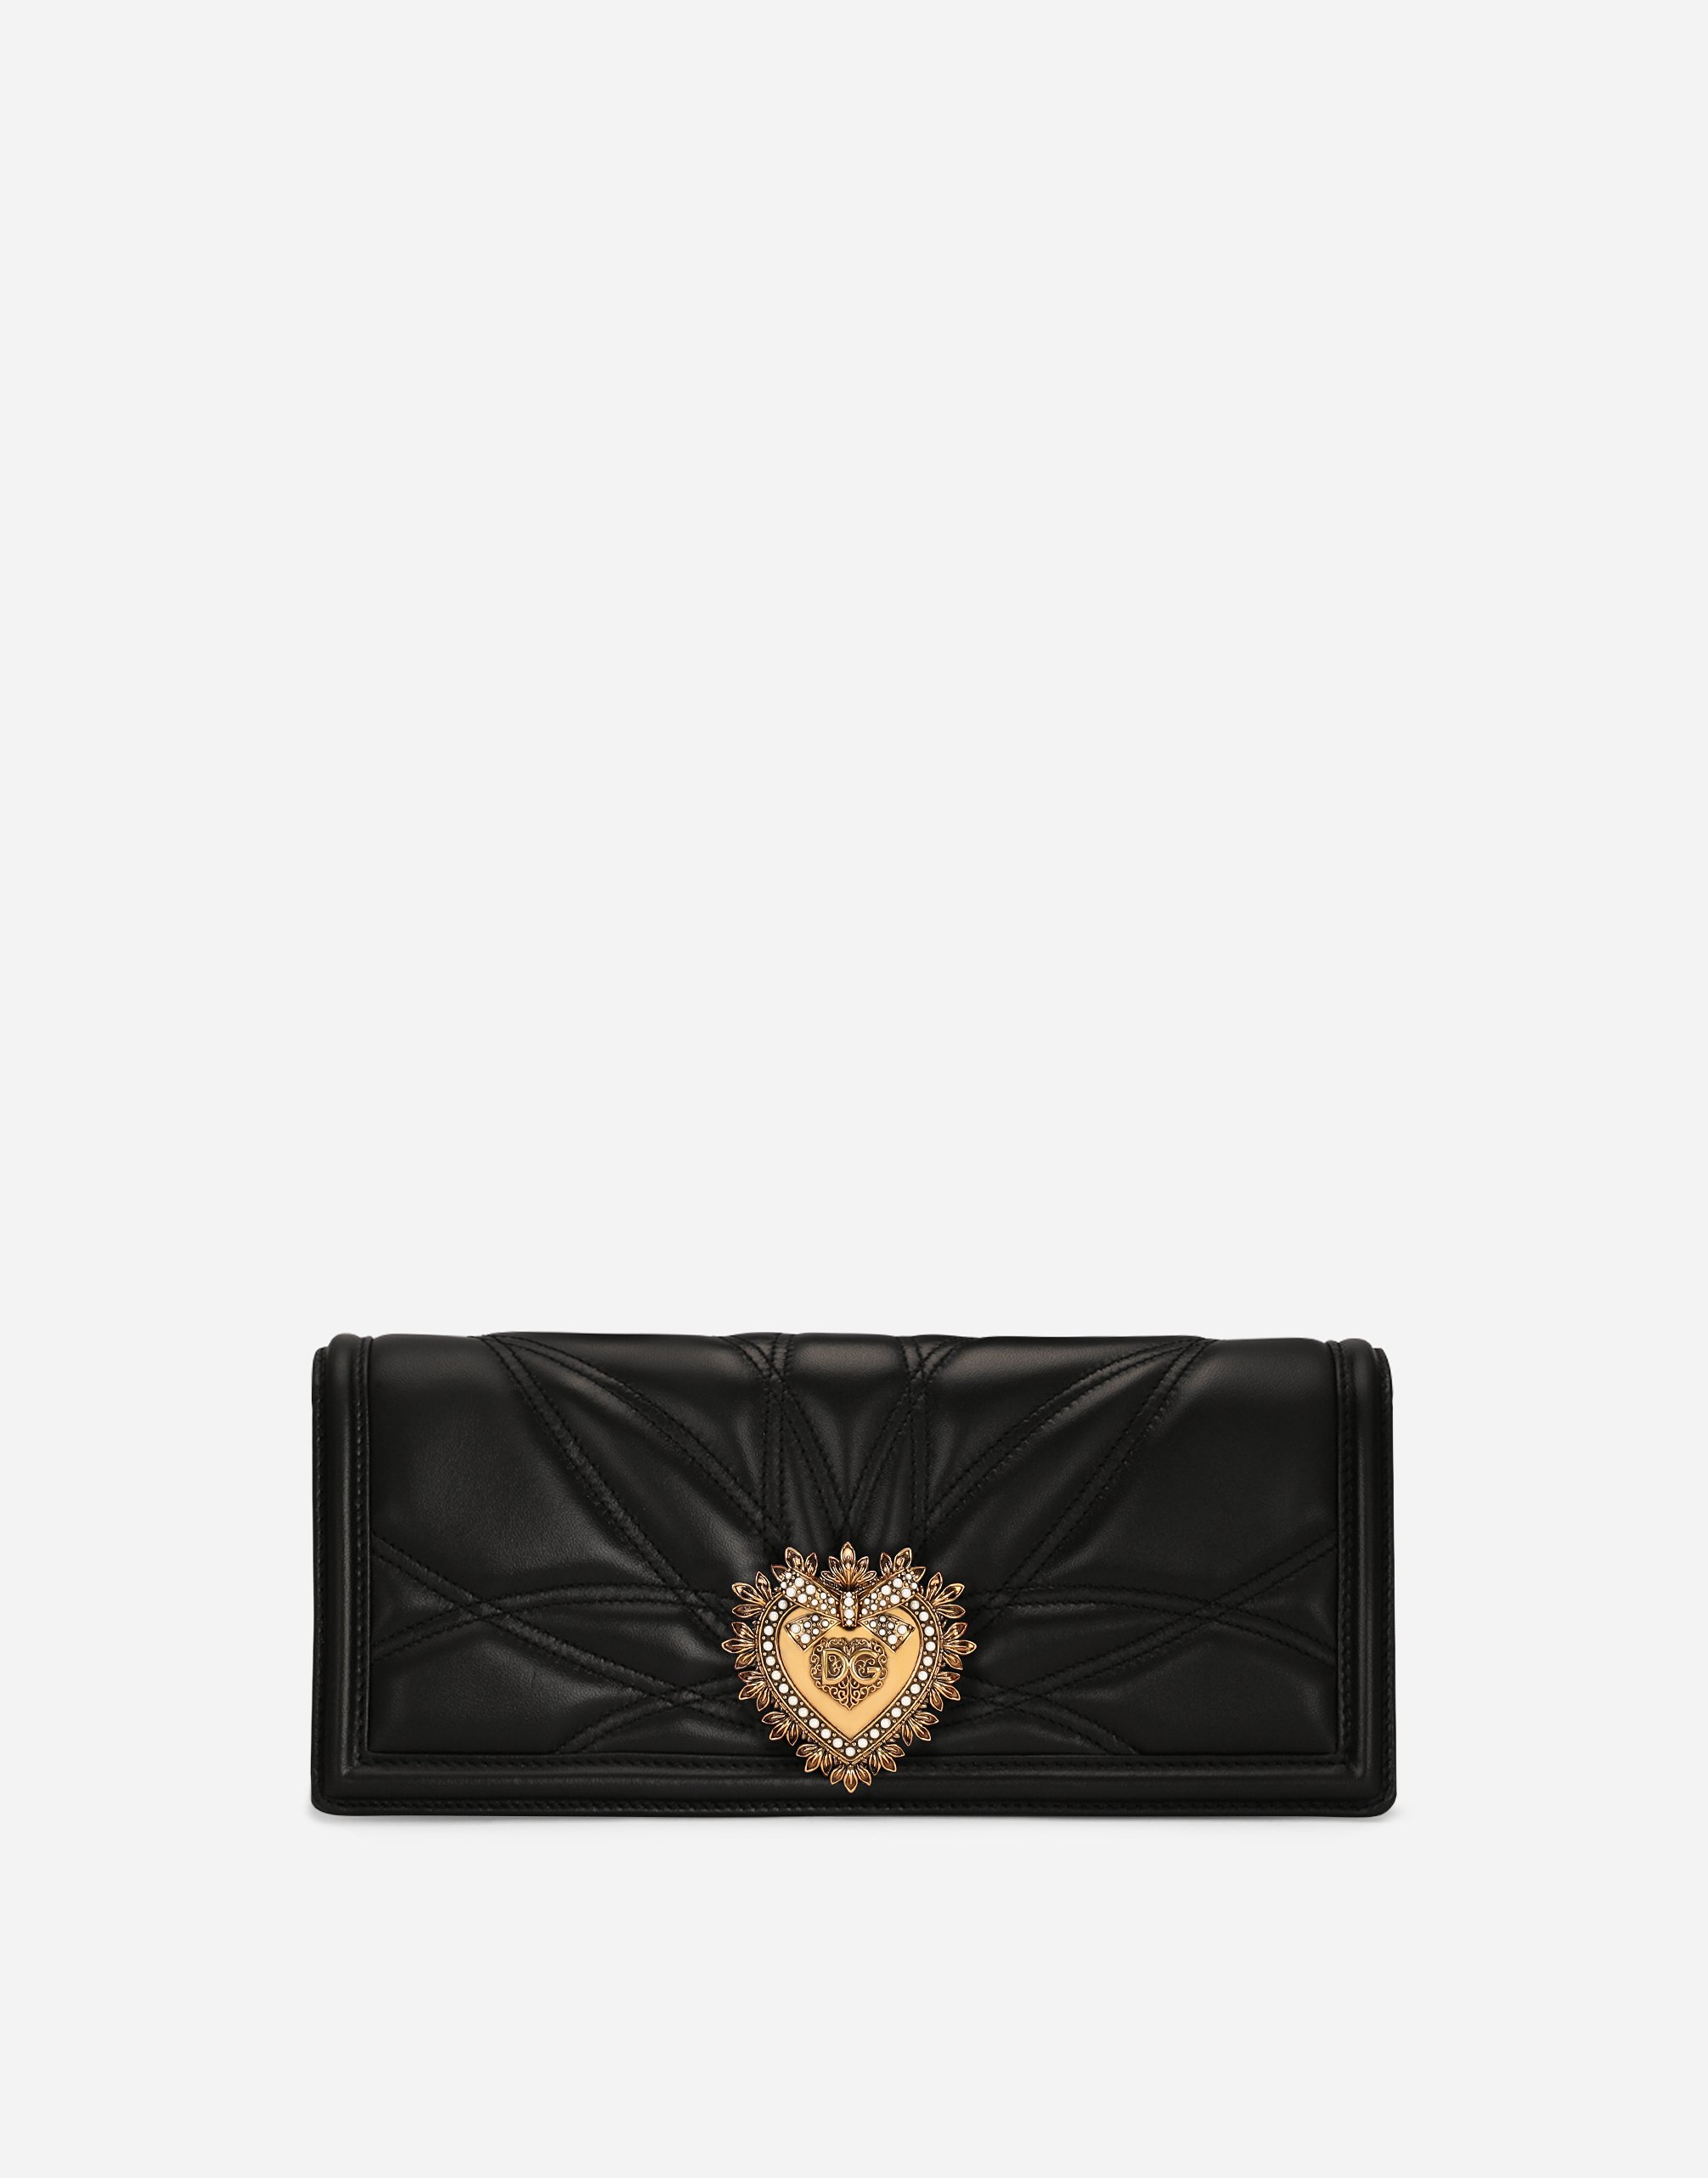 Dolce & Gabbana Quilted Nappa Leather Devotion Baguette Bag In Black